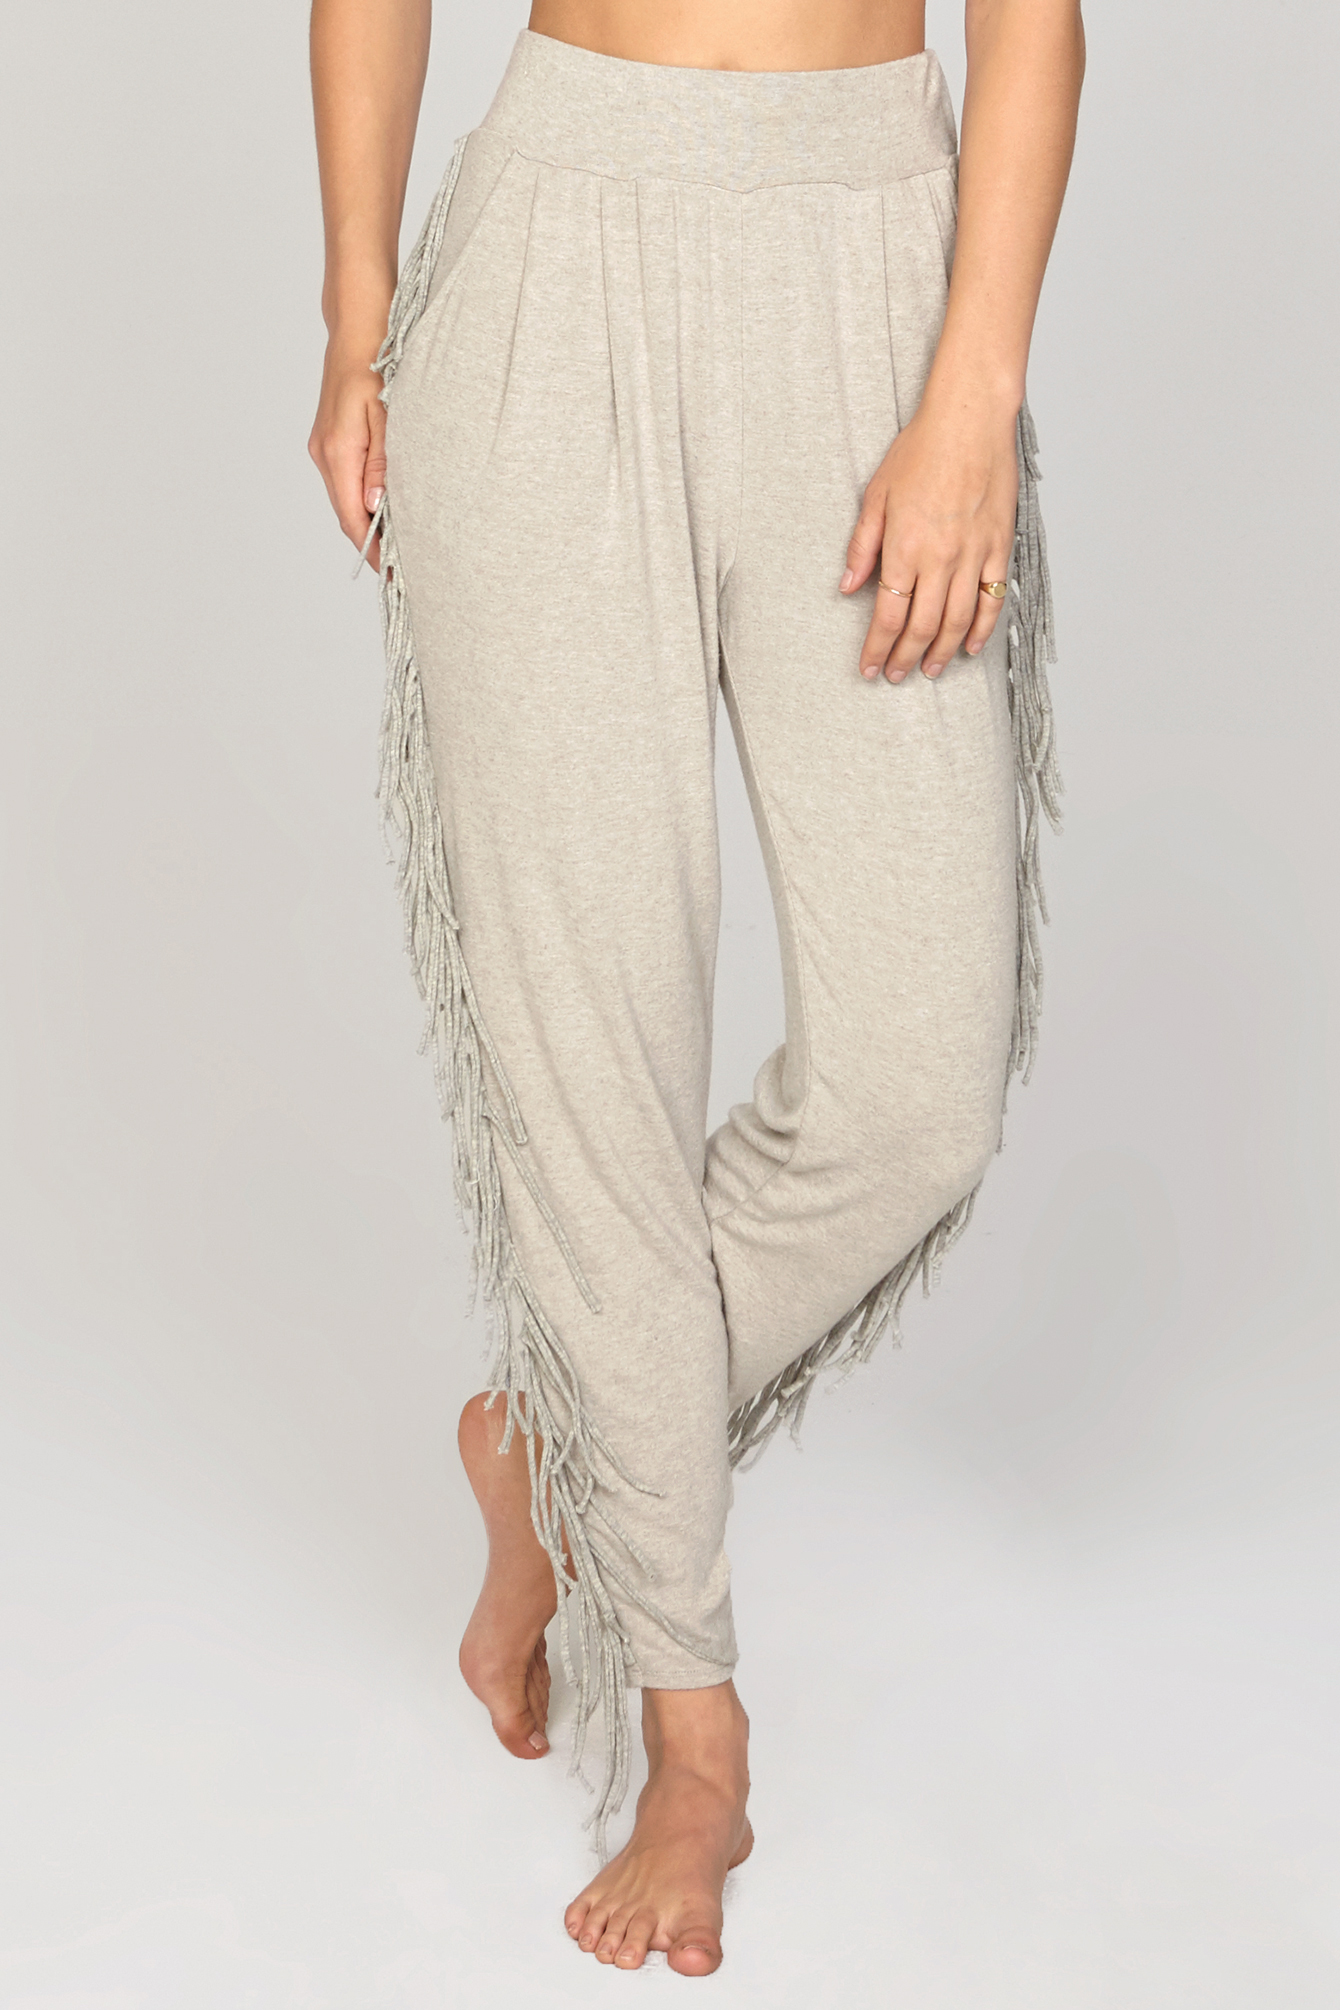 on the fringe pant blk heather grey 3 6 a 52